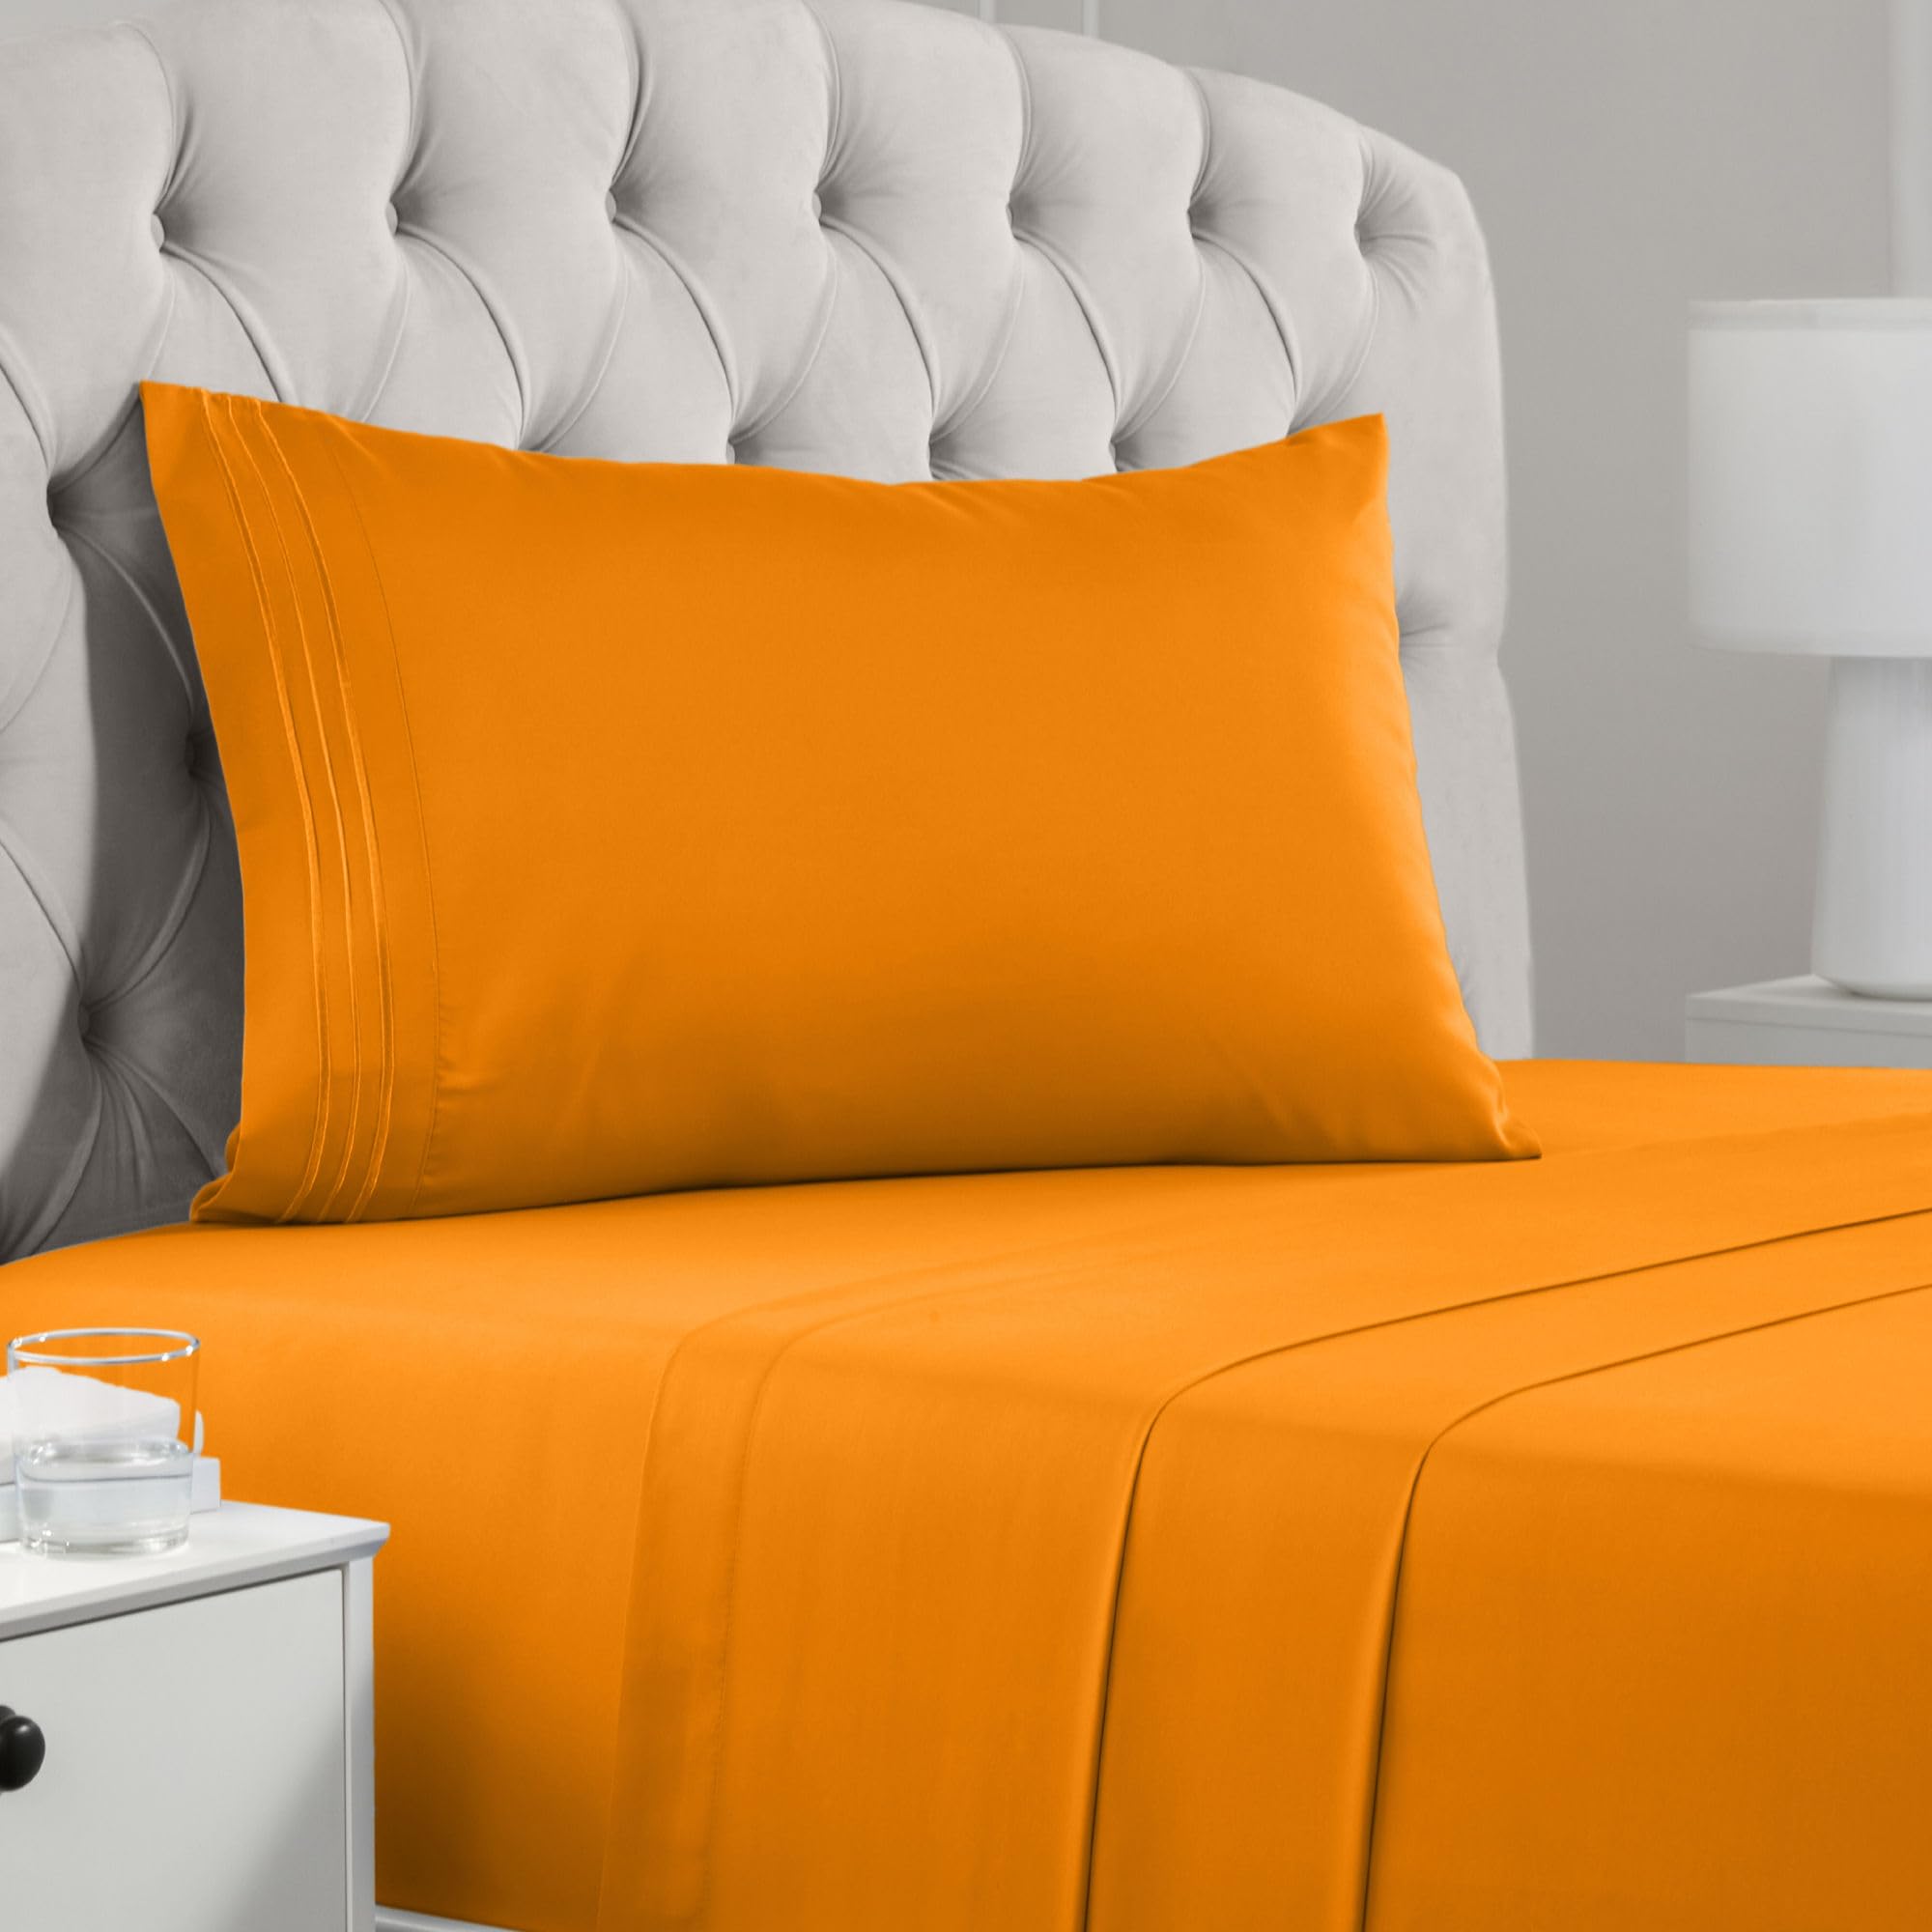 Book Cover Mellanni Twin Sheet Set - 3 Piece Iconic Collection Bedding Sheets & Pillowcases - Luxury, Extra Soft, Cooling Bed Sheets - Deep Pocket up to 16 inch - Wrinkle, Fade, Stain Resistant (Twin, Persimmon) Twin Persimmon